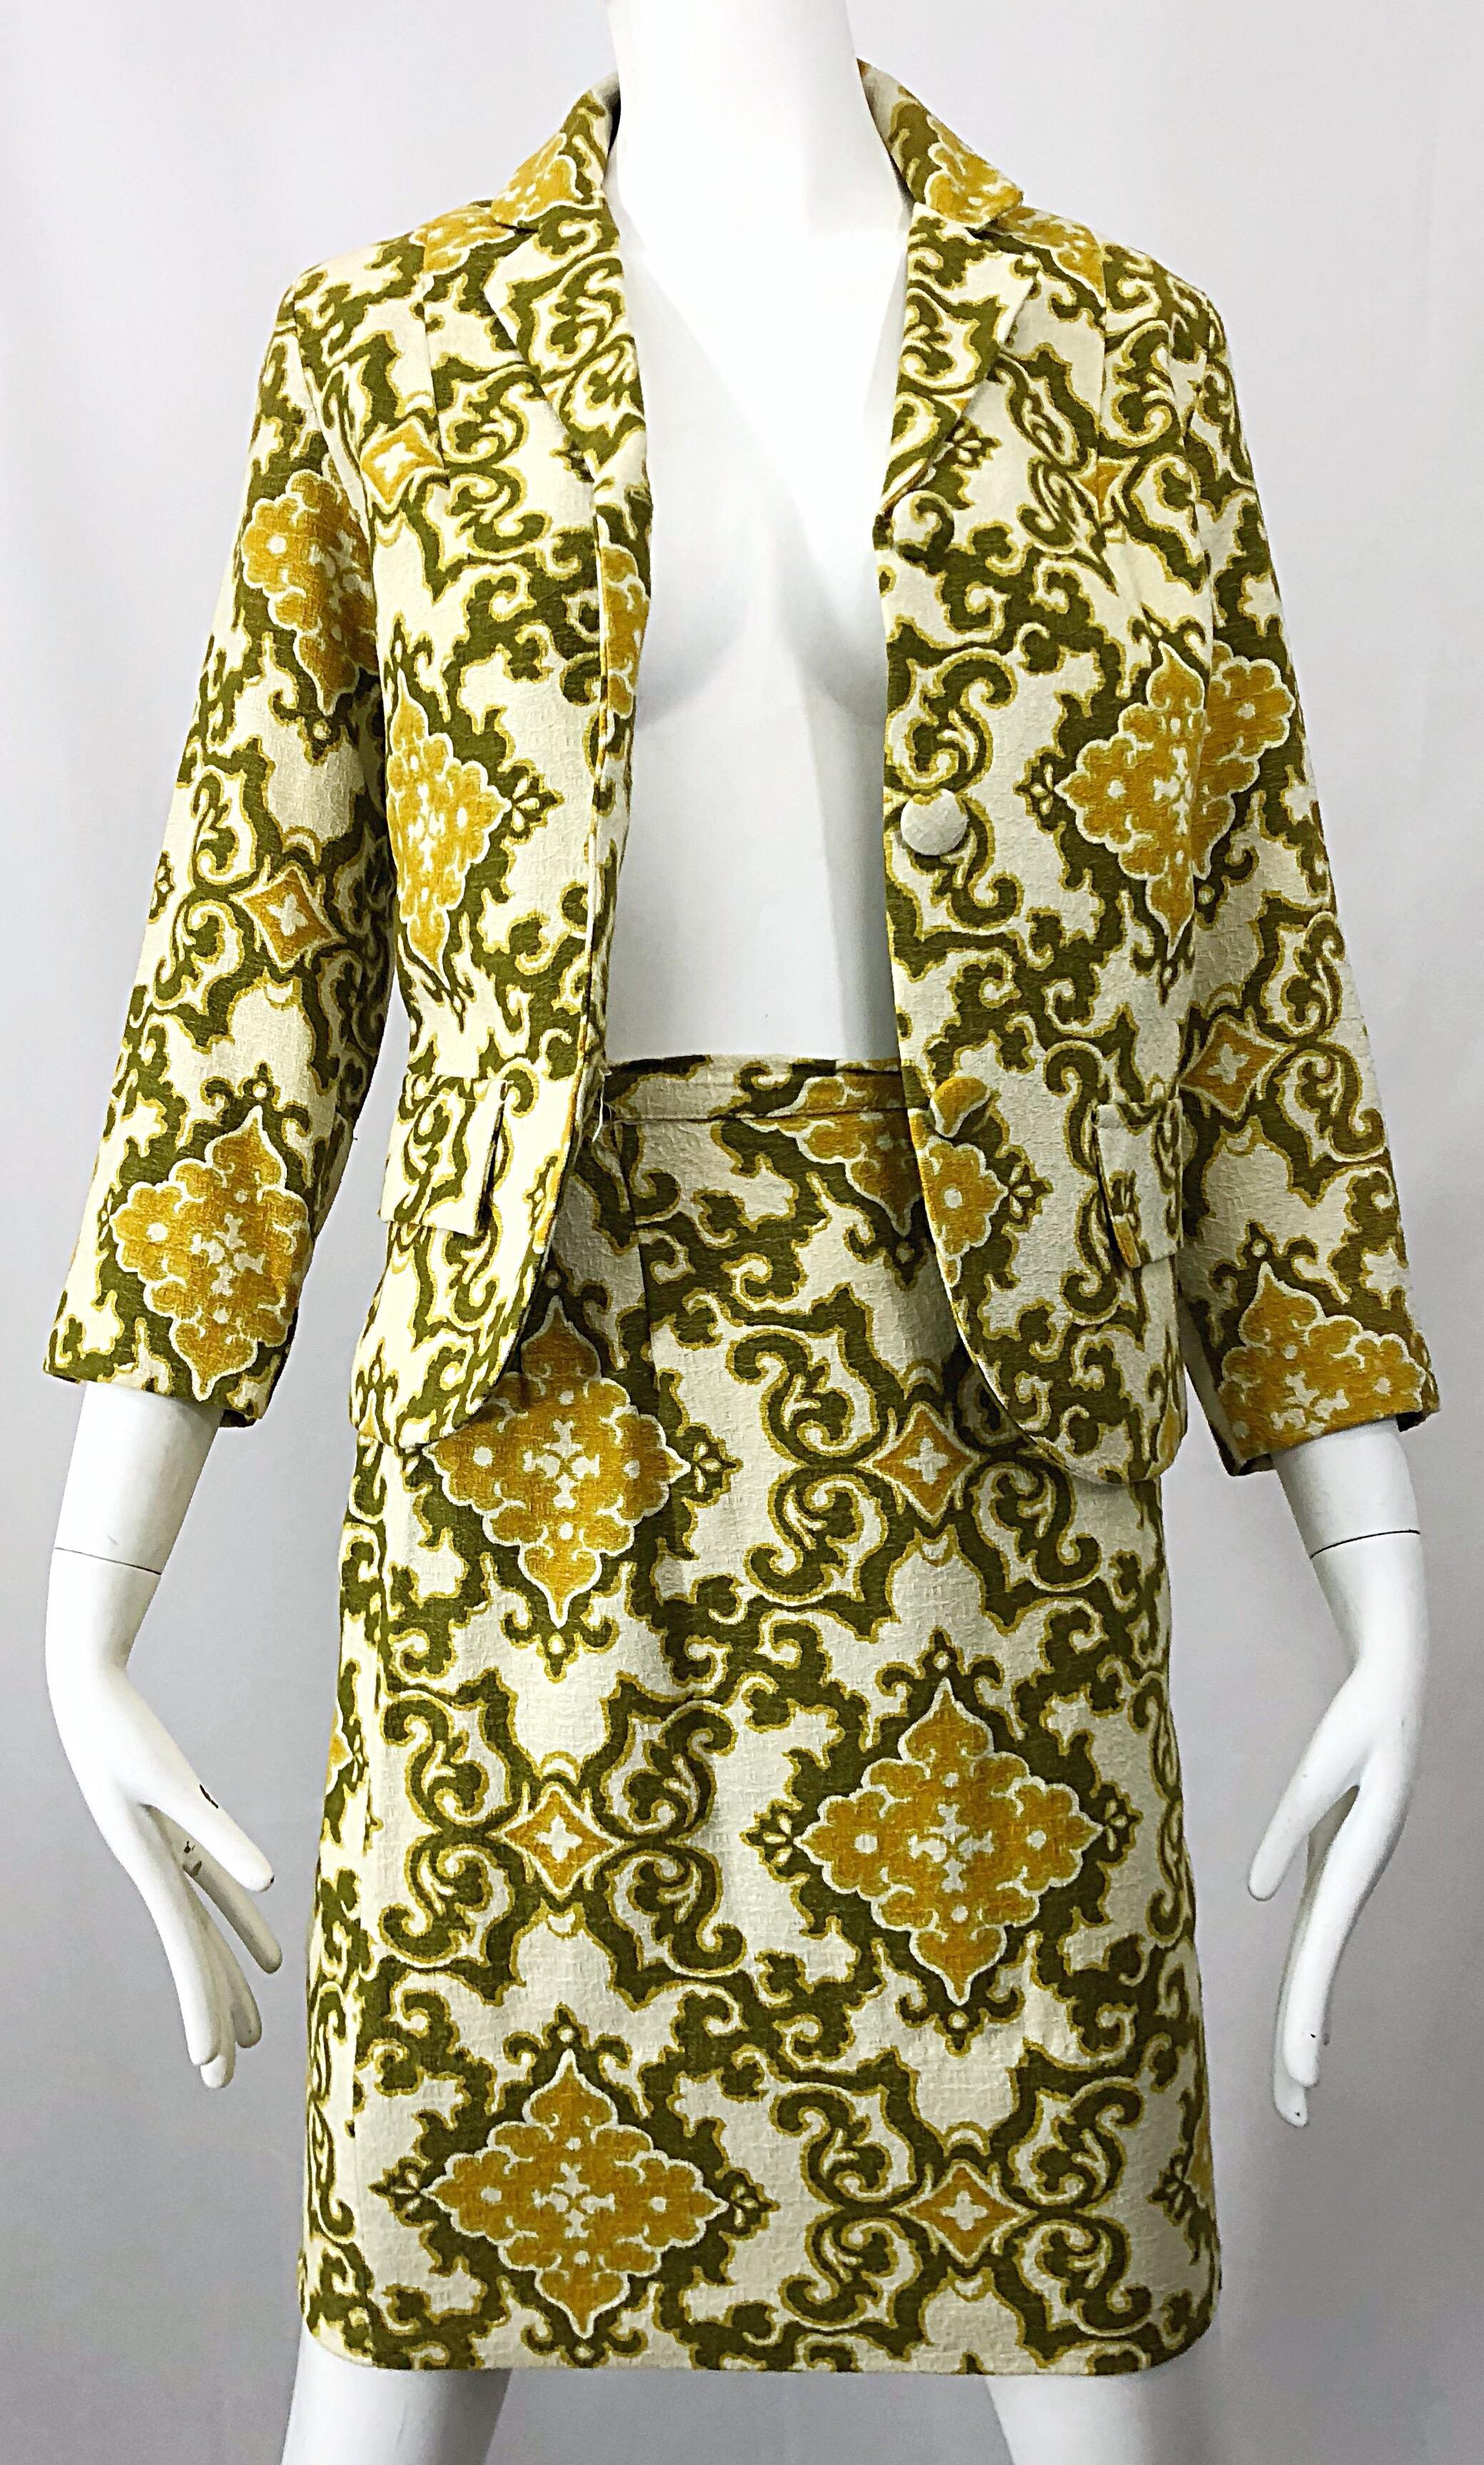 Chic 1960s Joseph Magnin Baroque Print Chartreuse Silk + Cotton 60s Skirt Suit In Excellent Condition For Sale In San Diego, CA